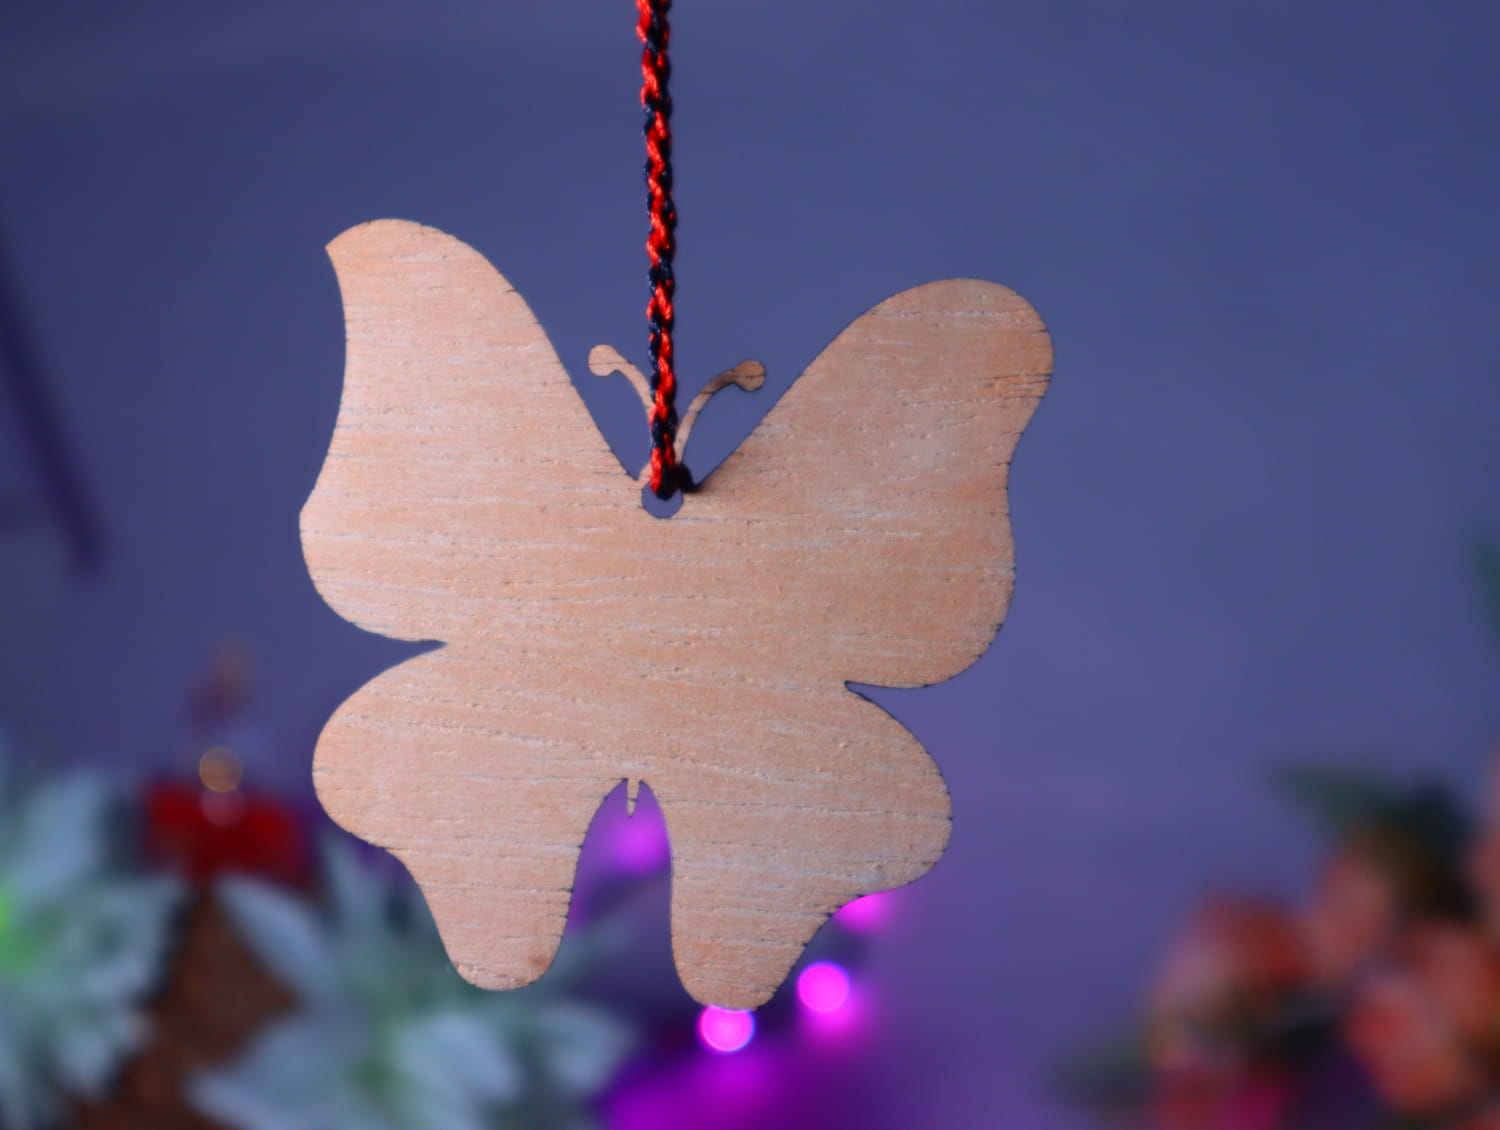 Laser Cut Wooden Cutout Butterfly Craft Unfinished Butterfly Blank Free Vector